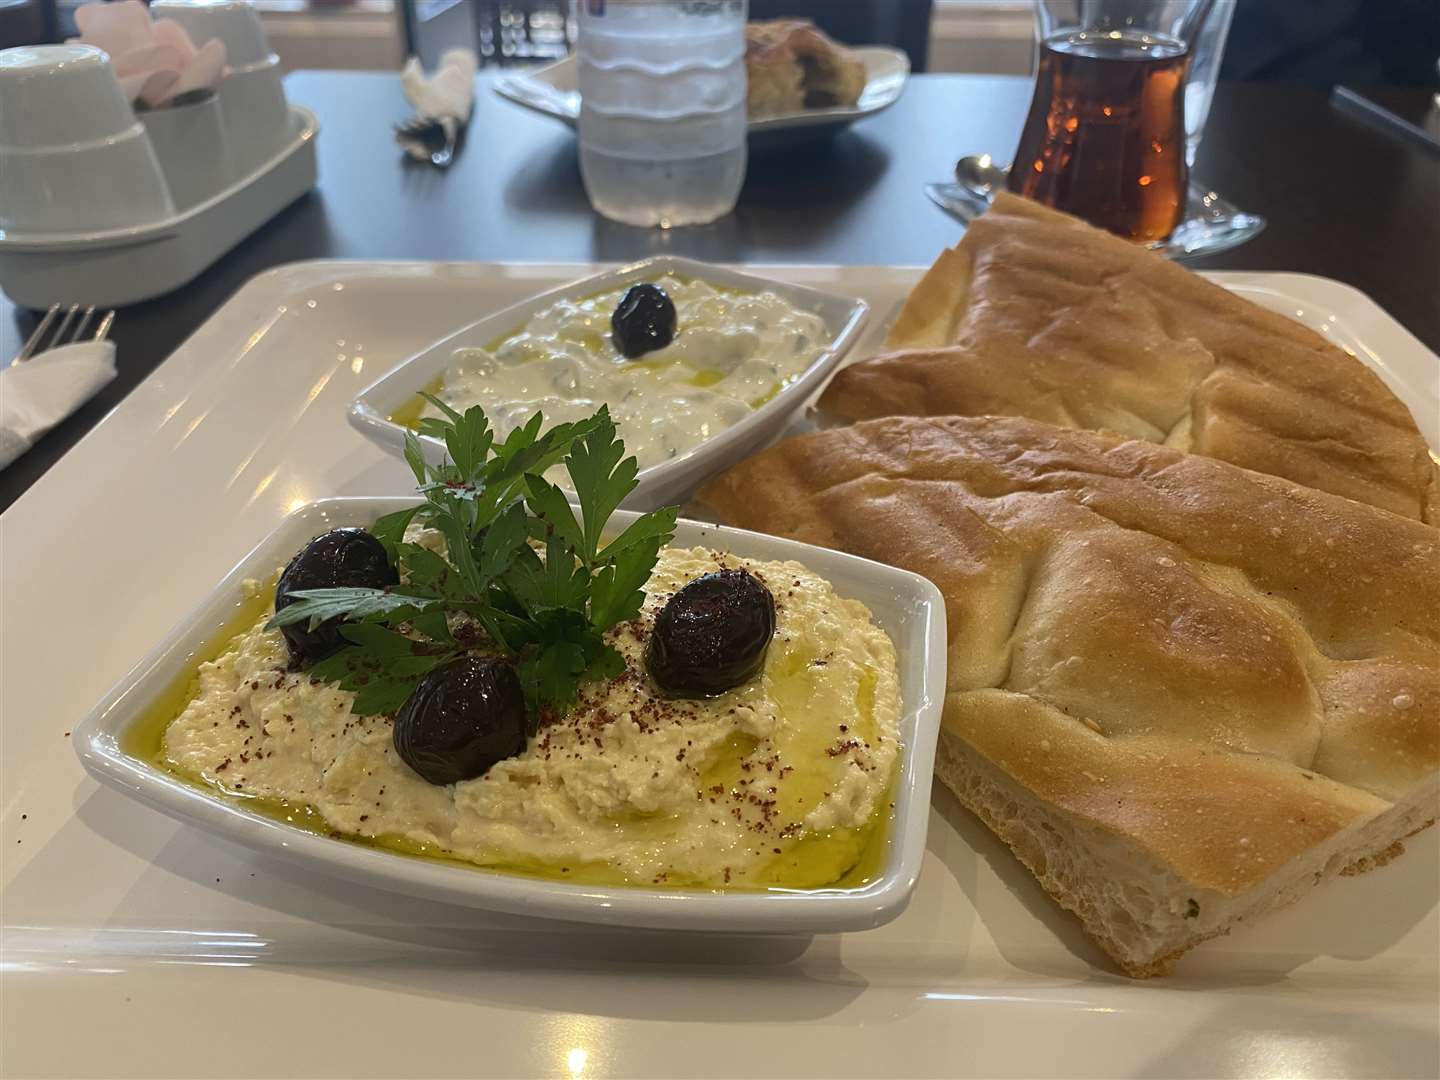 Humous and Tzatziki dip with bread from Taste of Cyprus